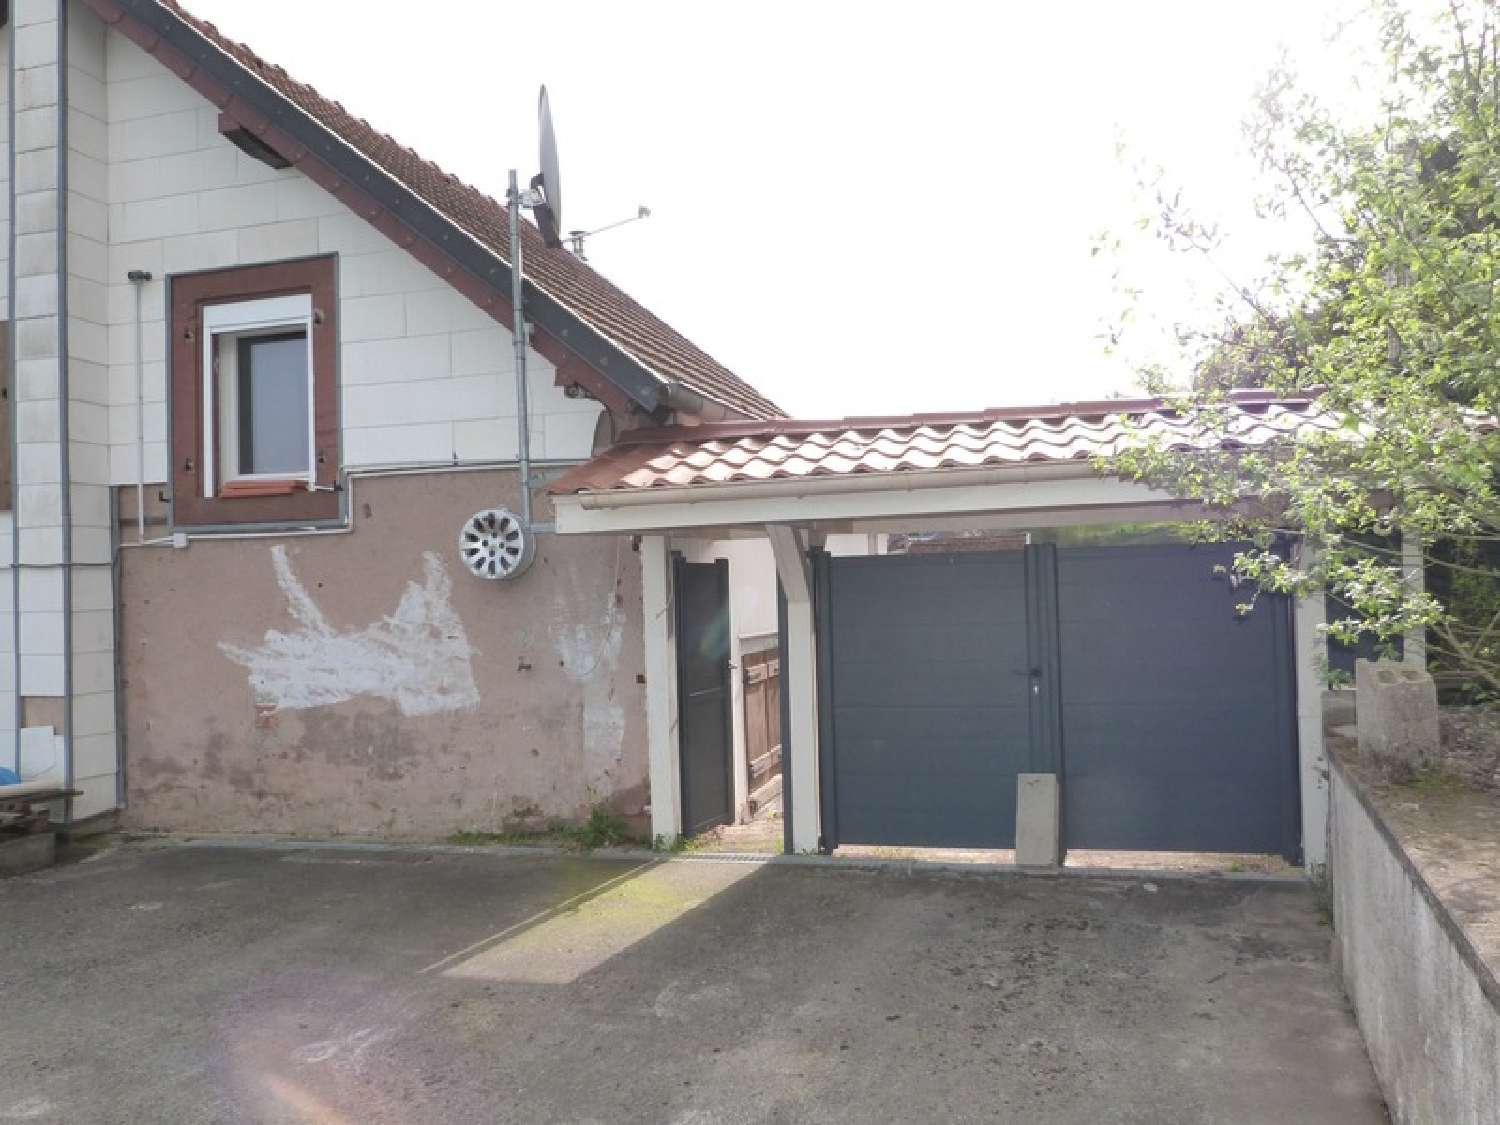  for sale house Soucht Moselle 3